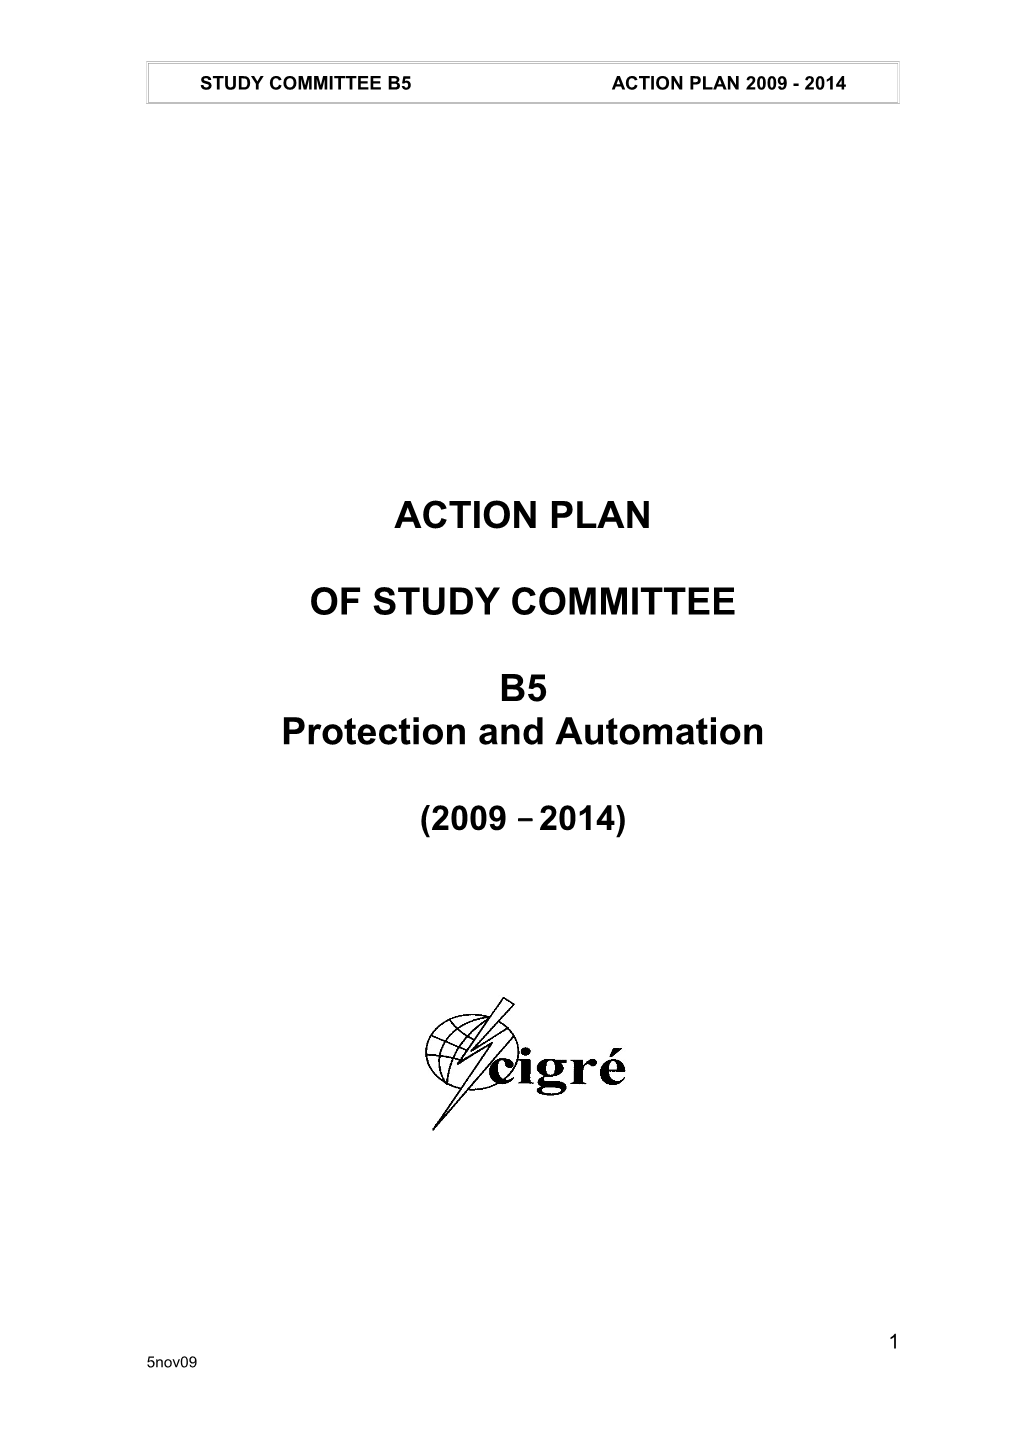 Study Committee B5action Plan 2009 - 2014